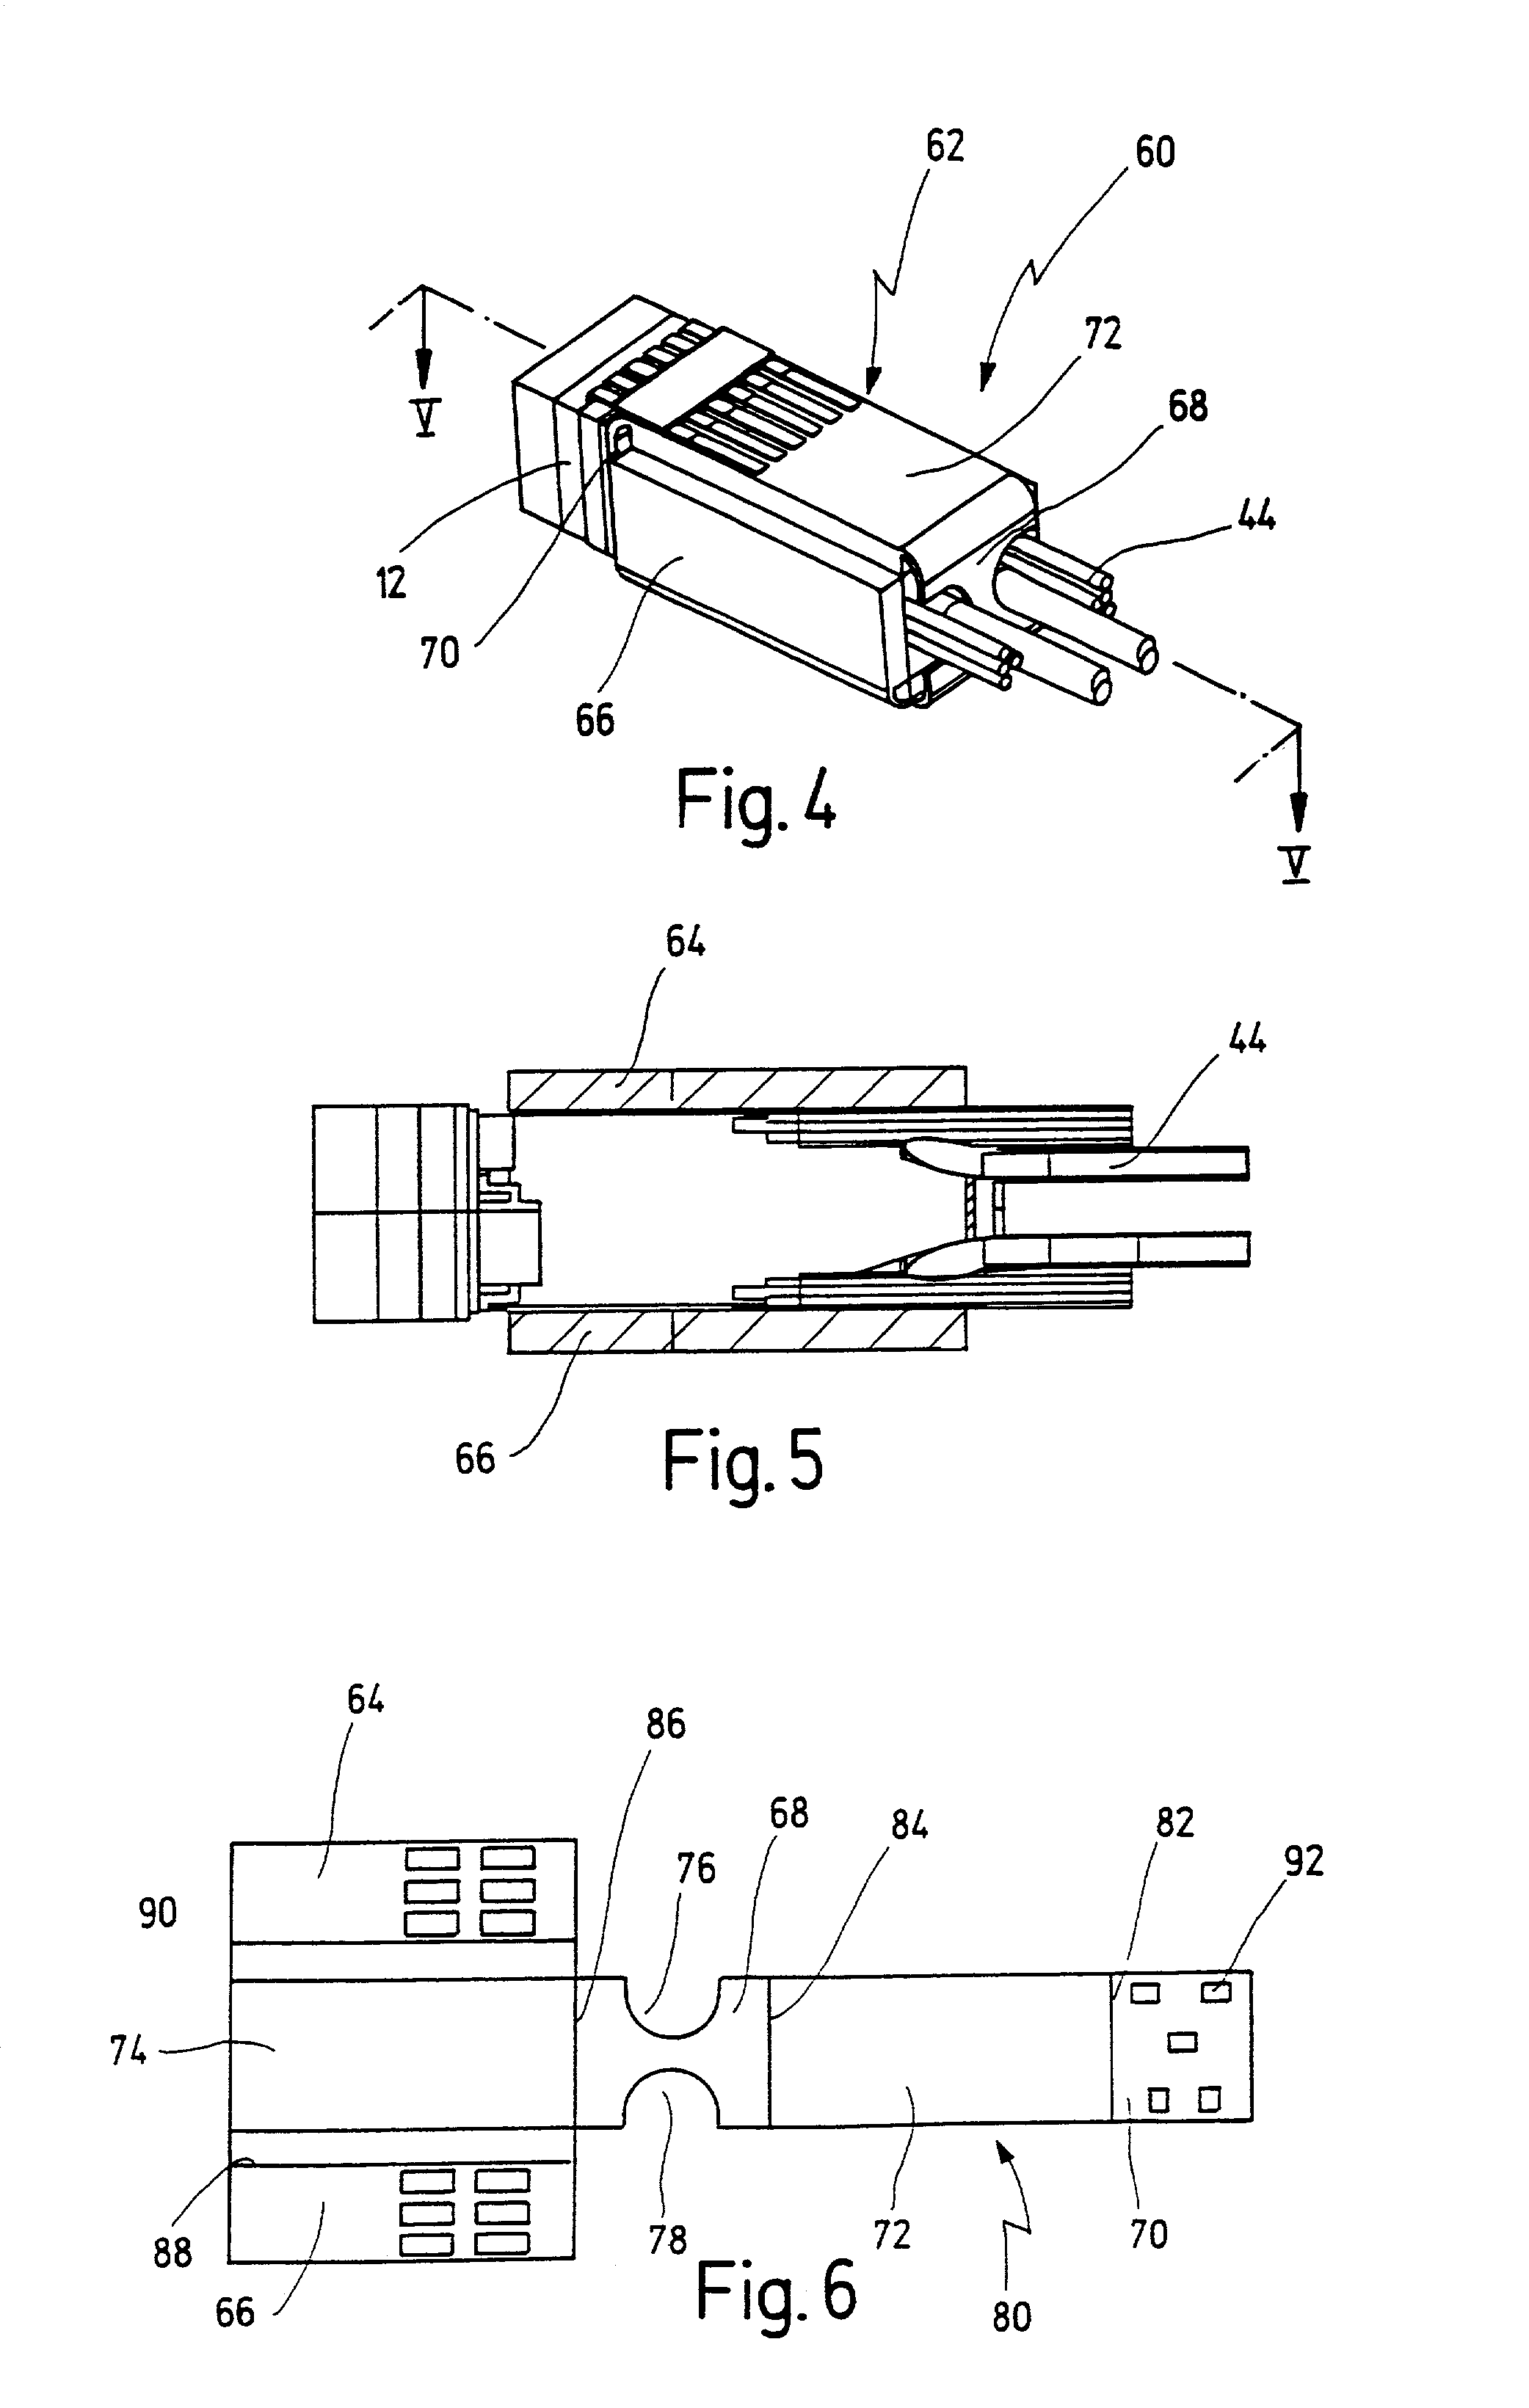 Image pick-up module and method for assembling such an image pick-up module